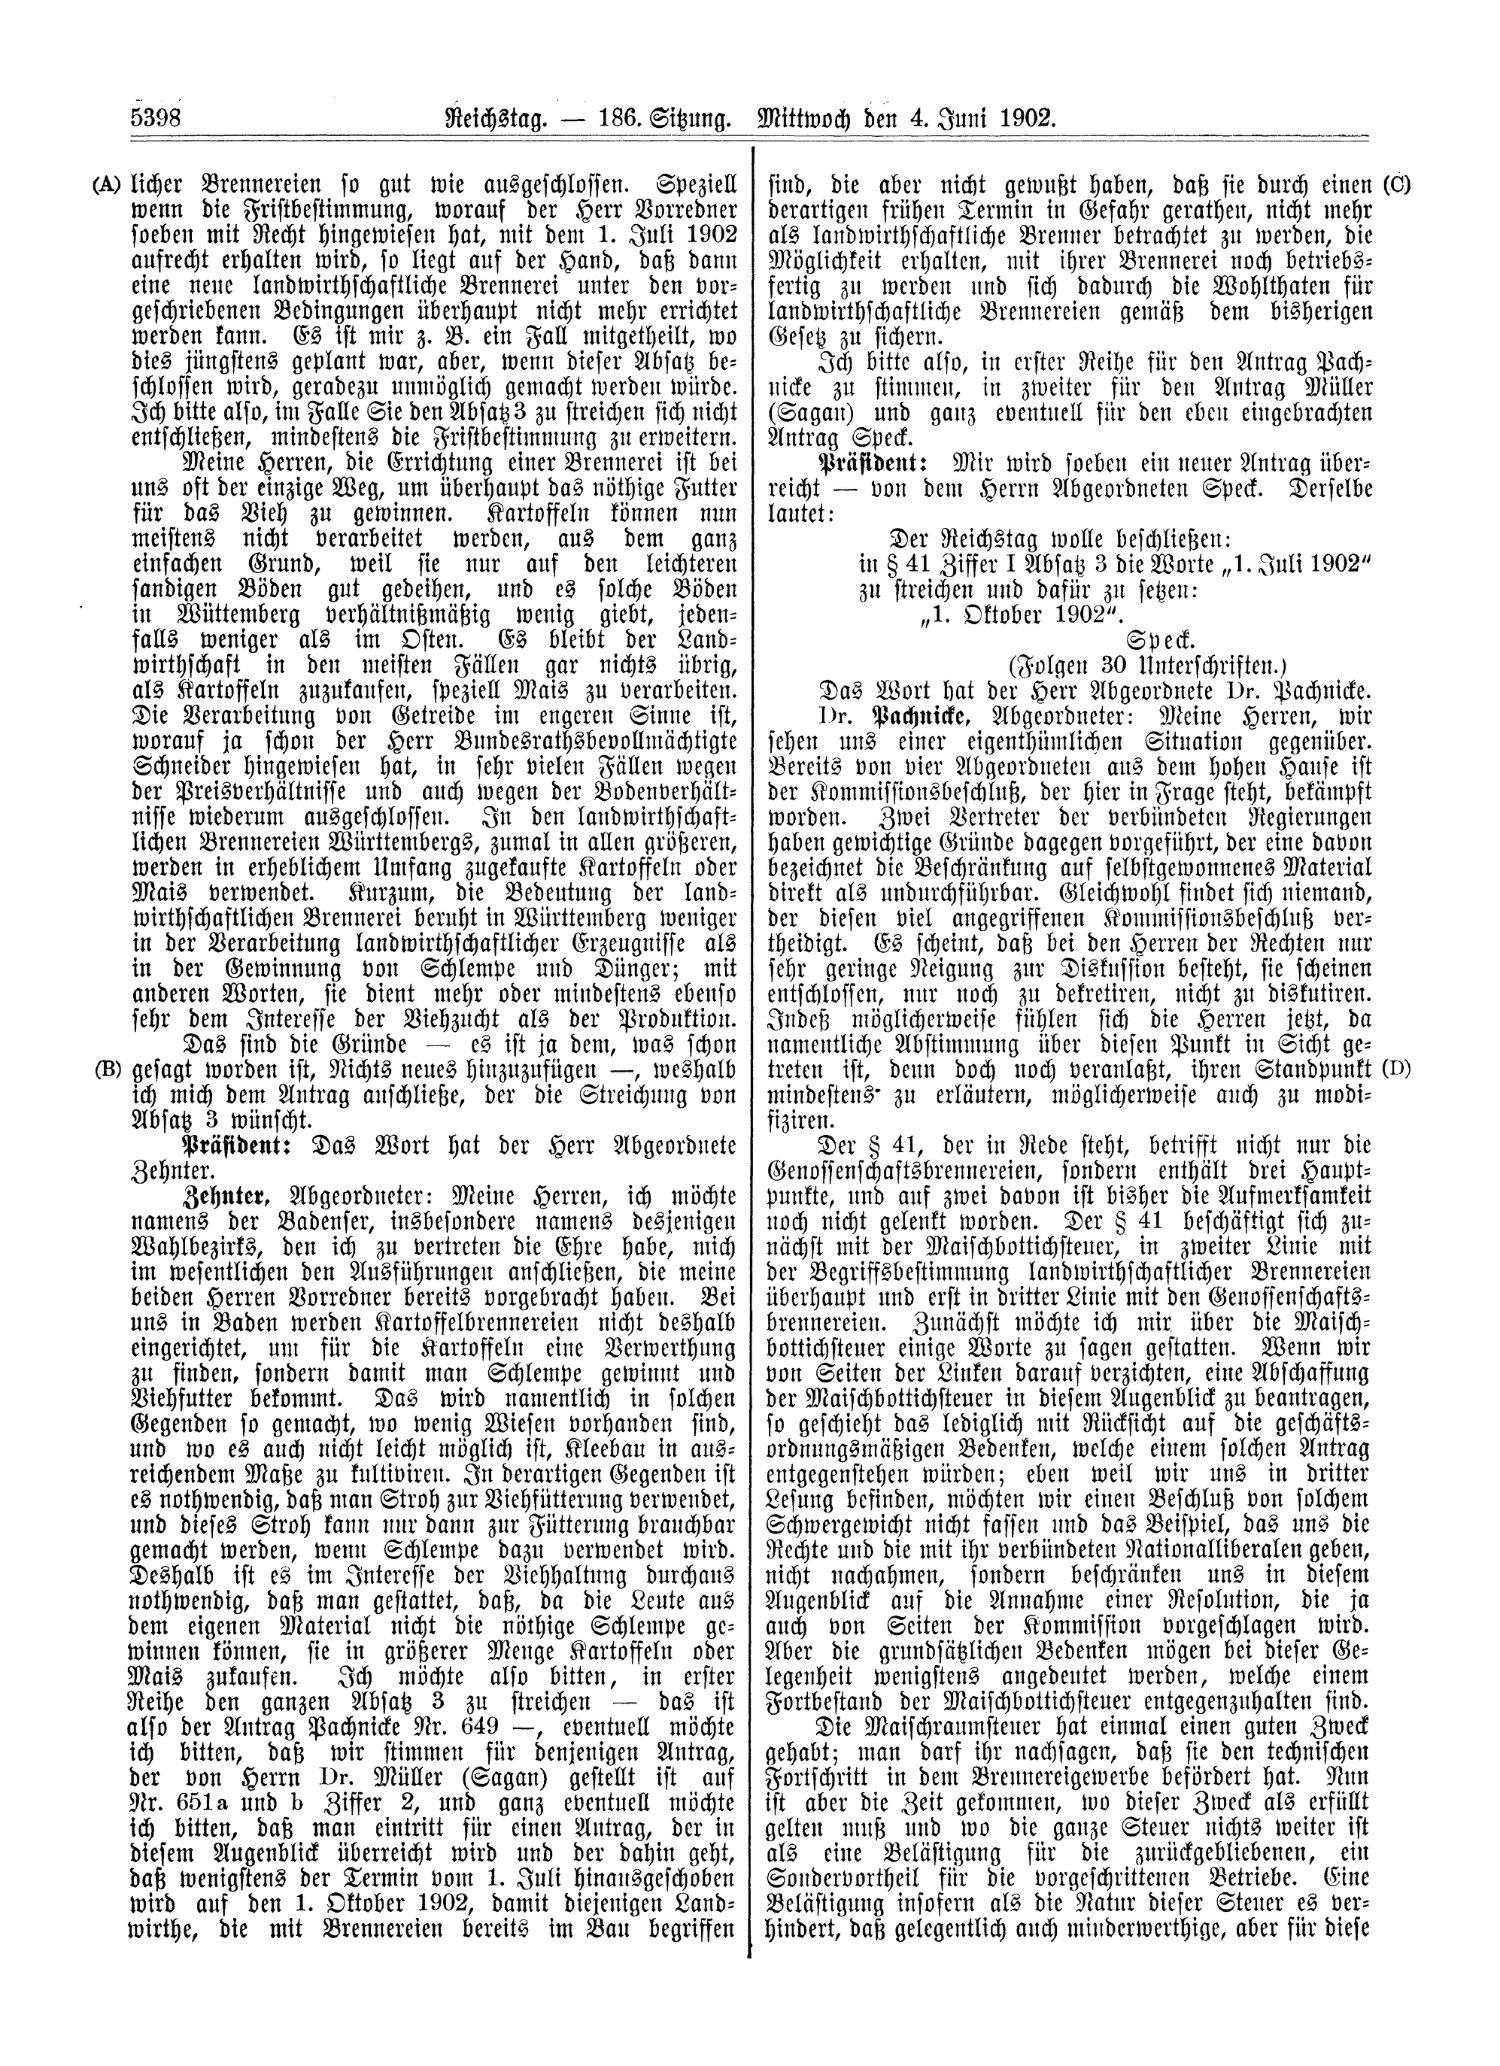 Scan of page 5398